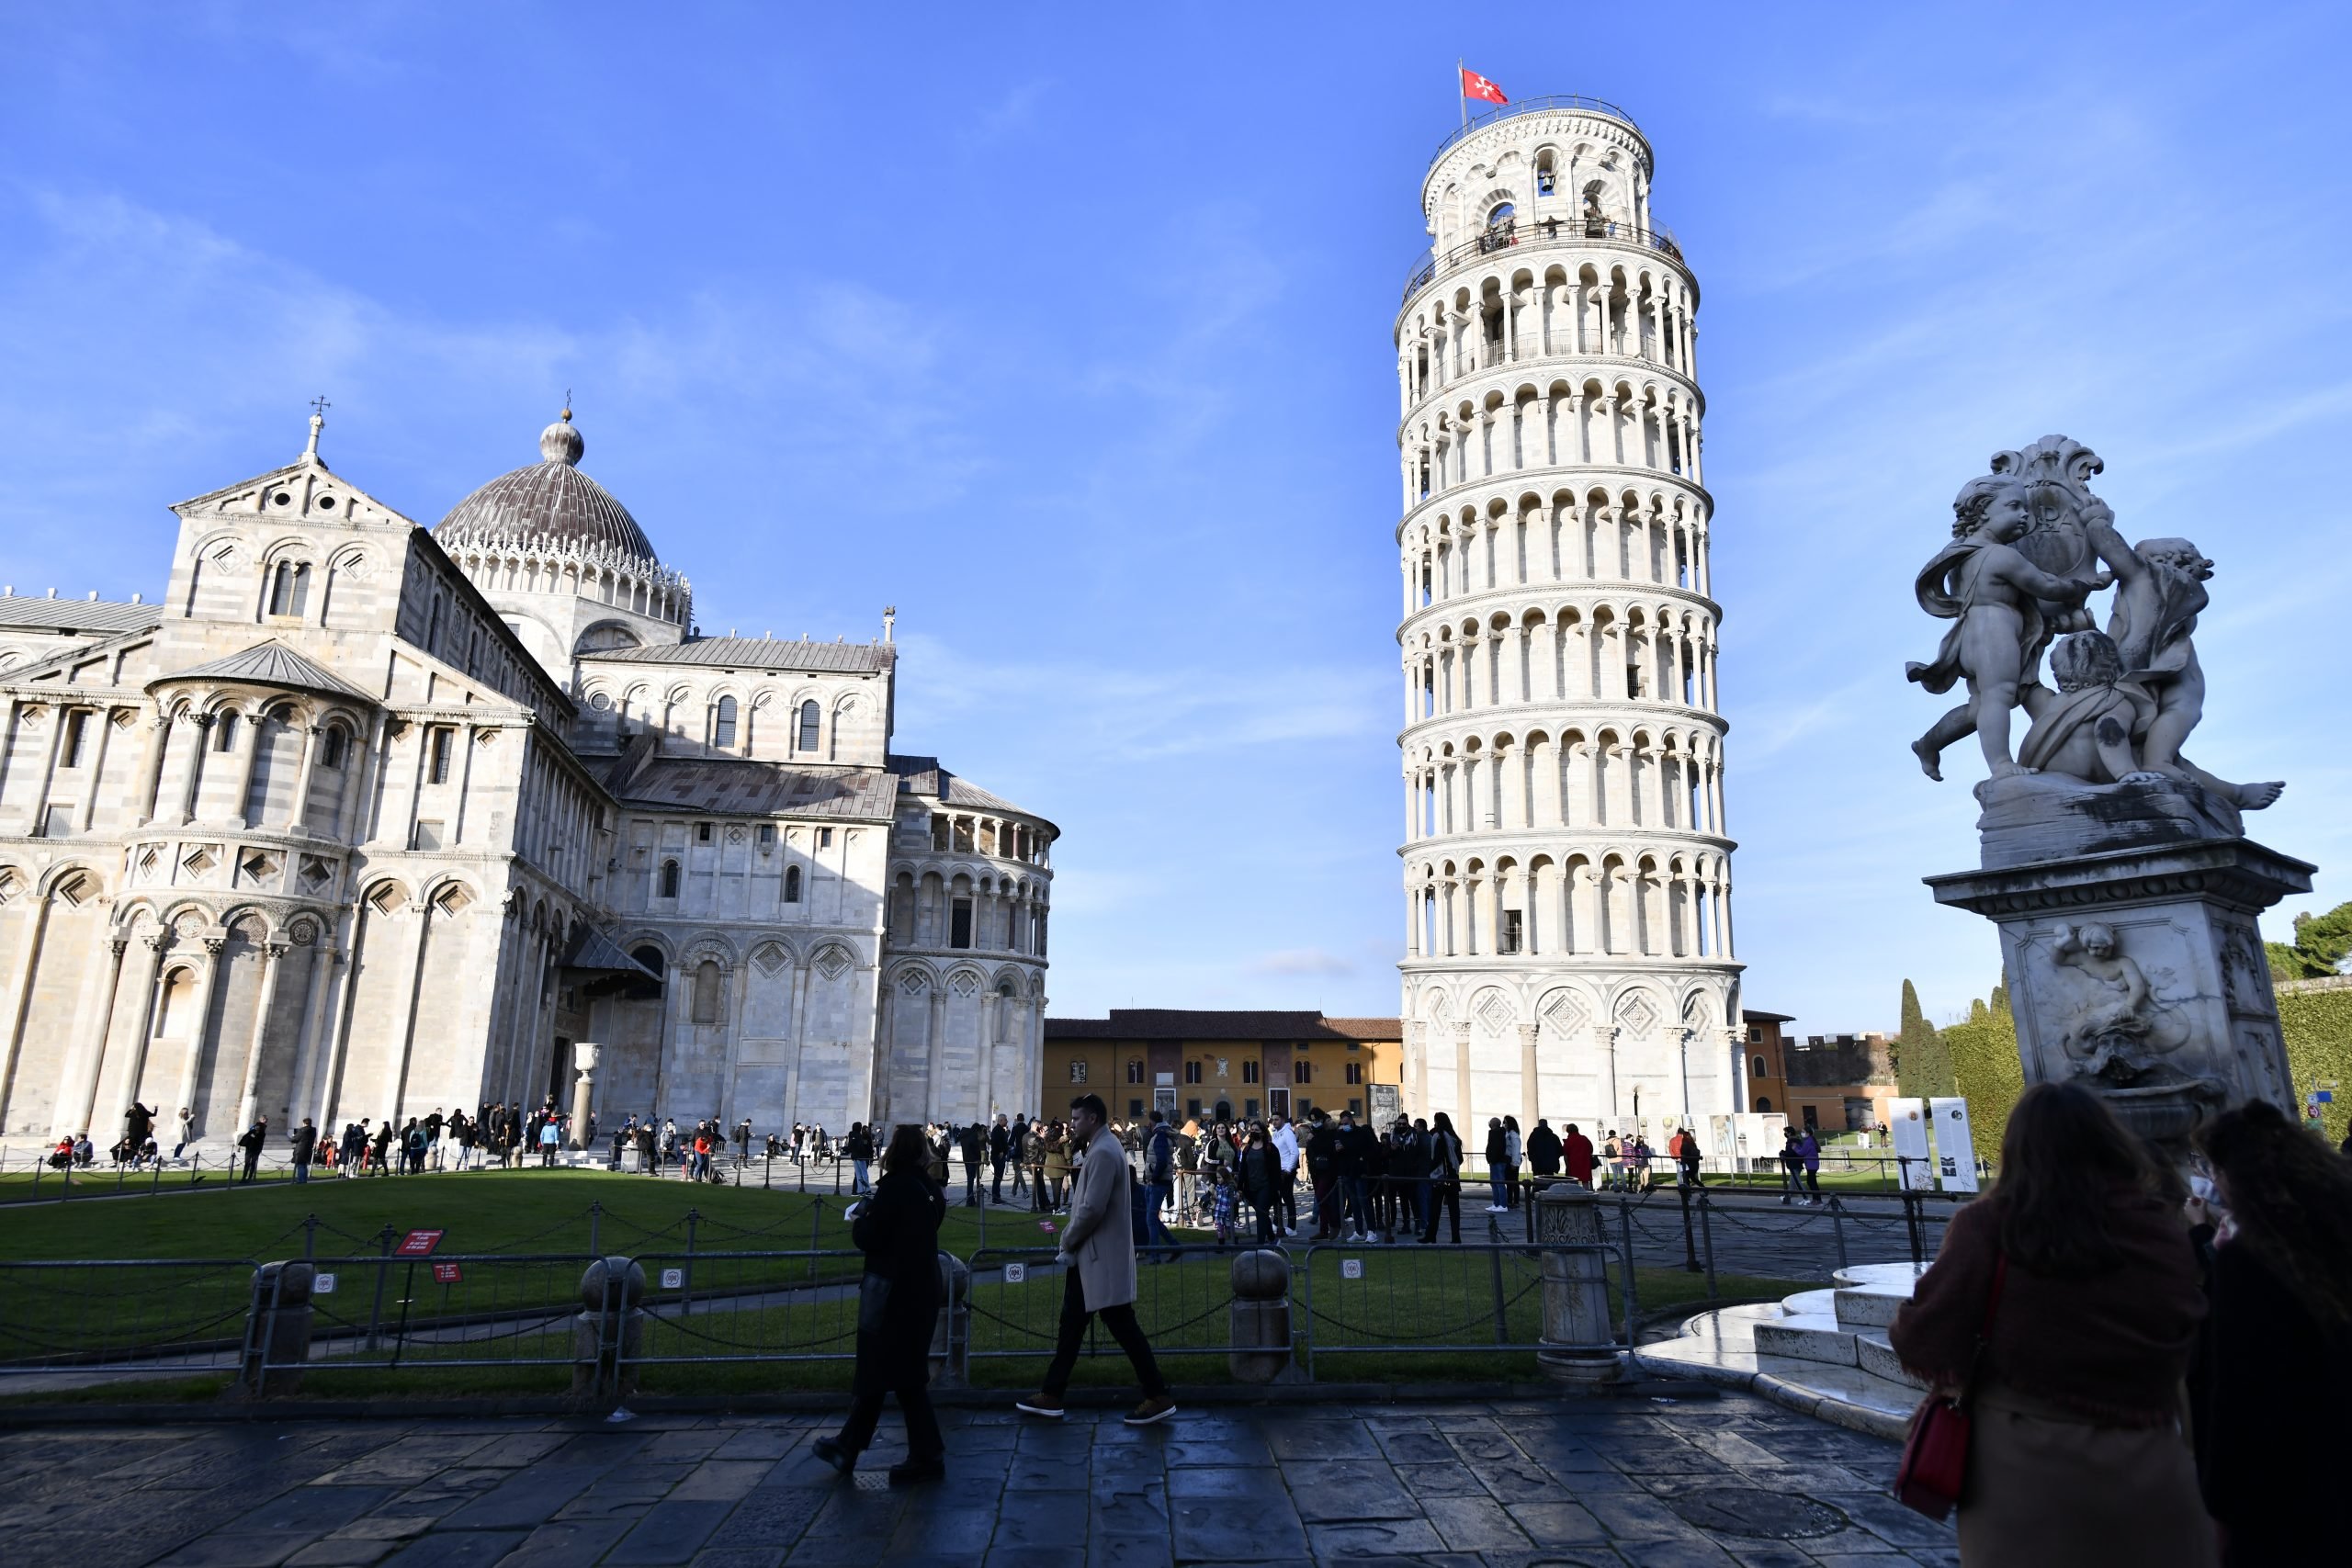 Leaning Tower of Pisa  History, Architecture, Foundation & Lean